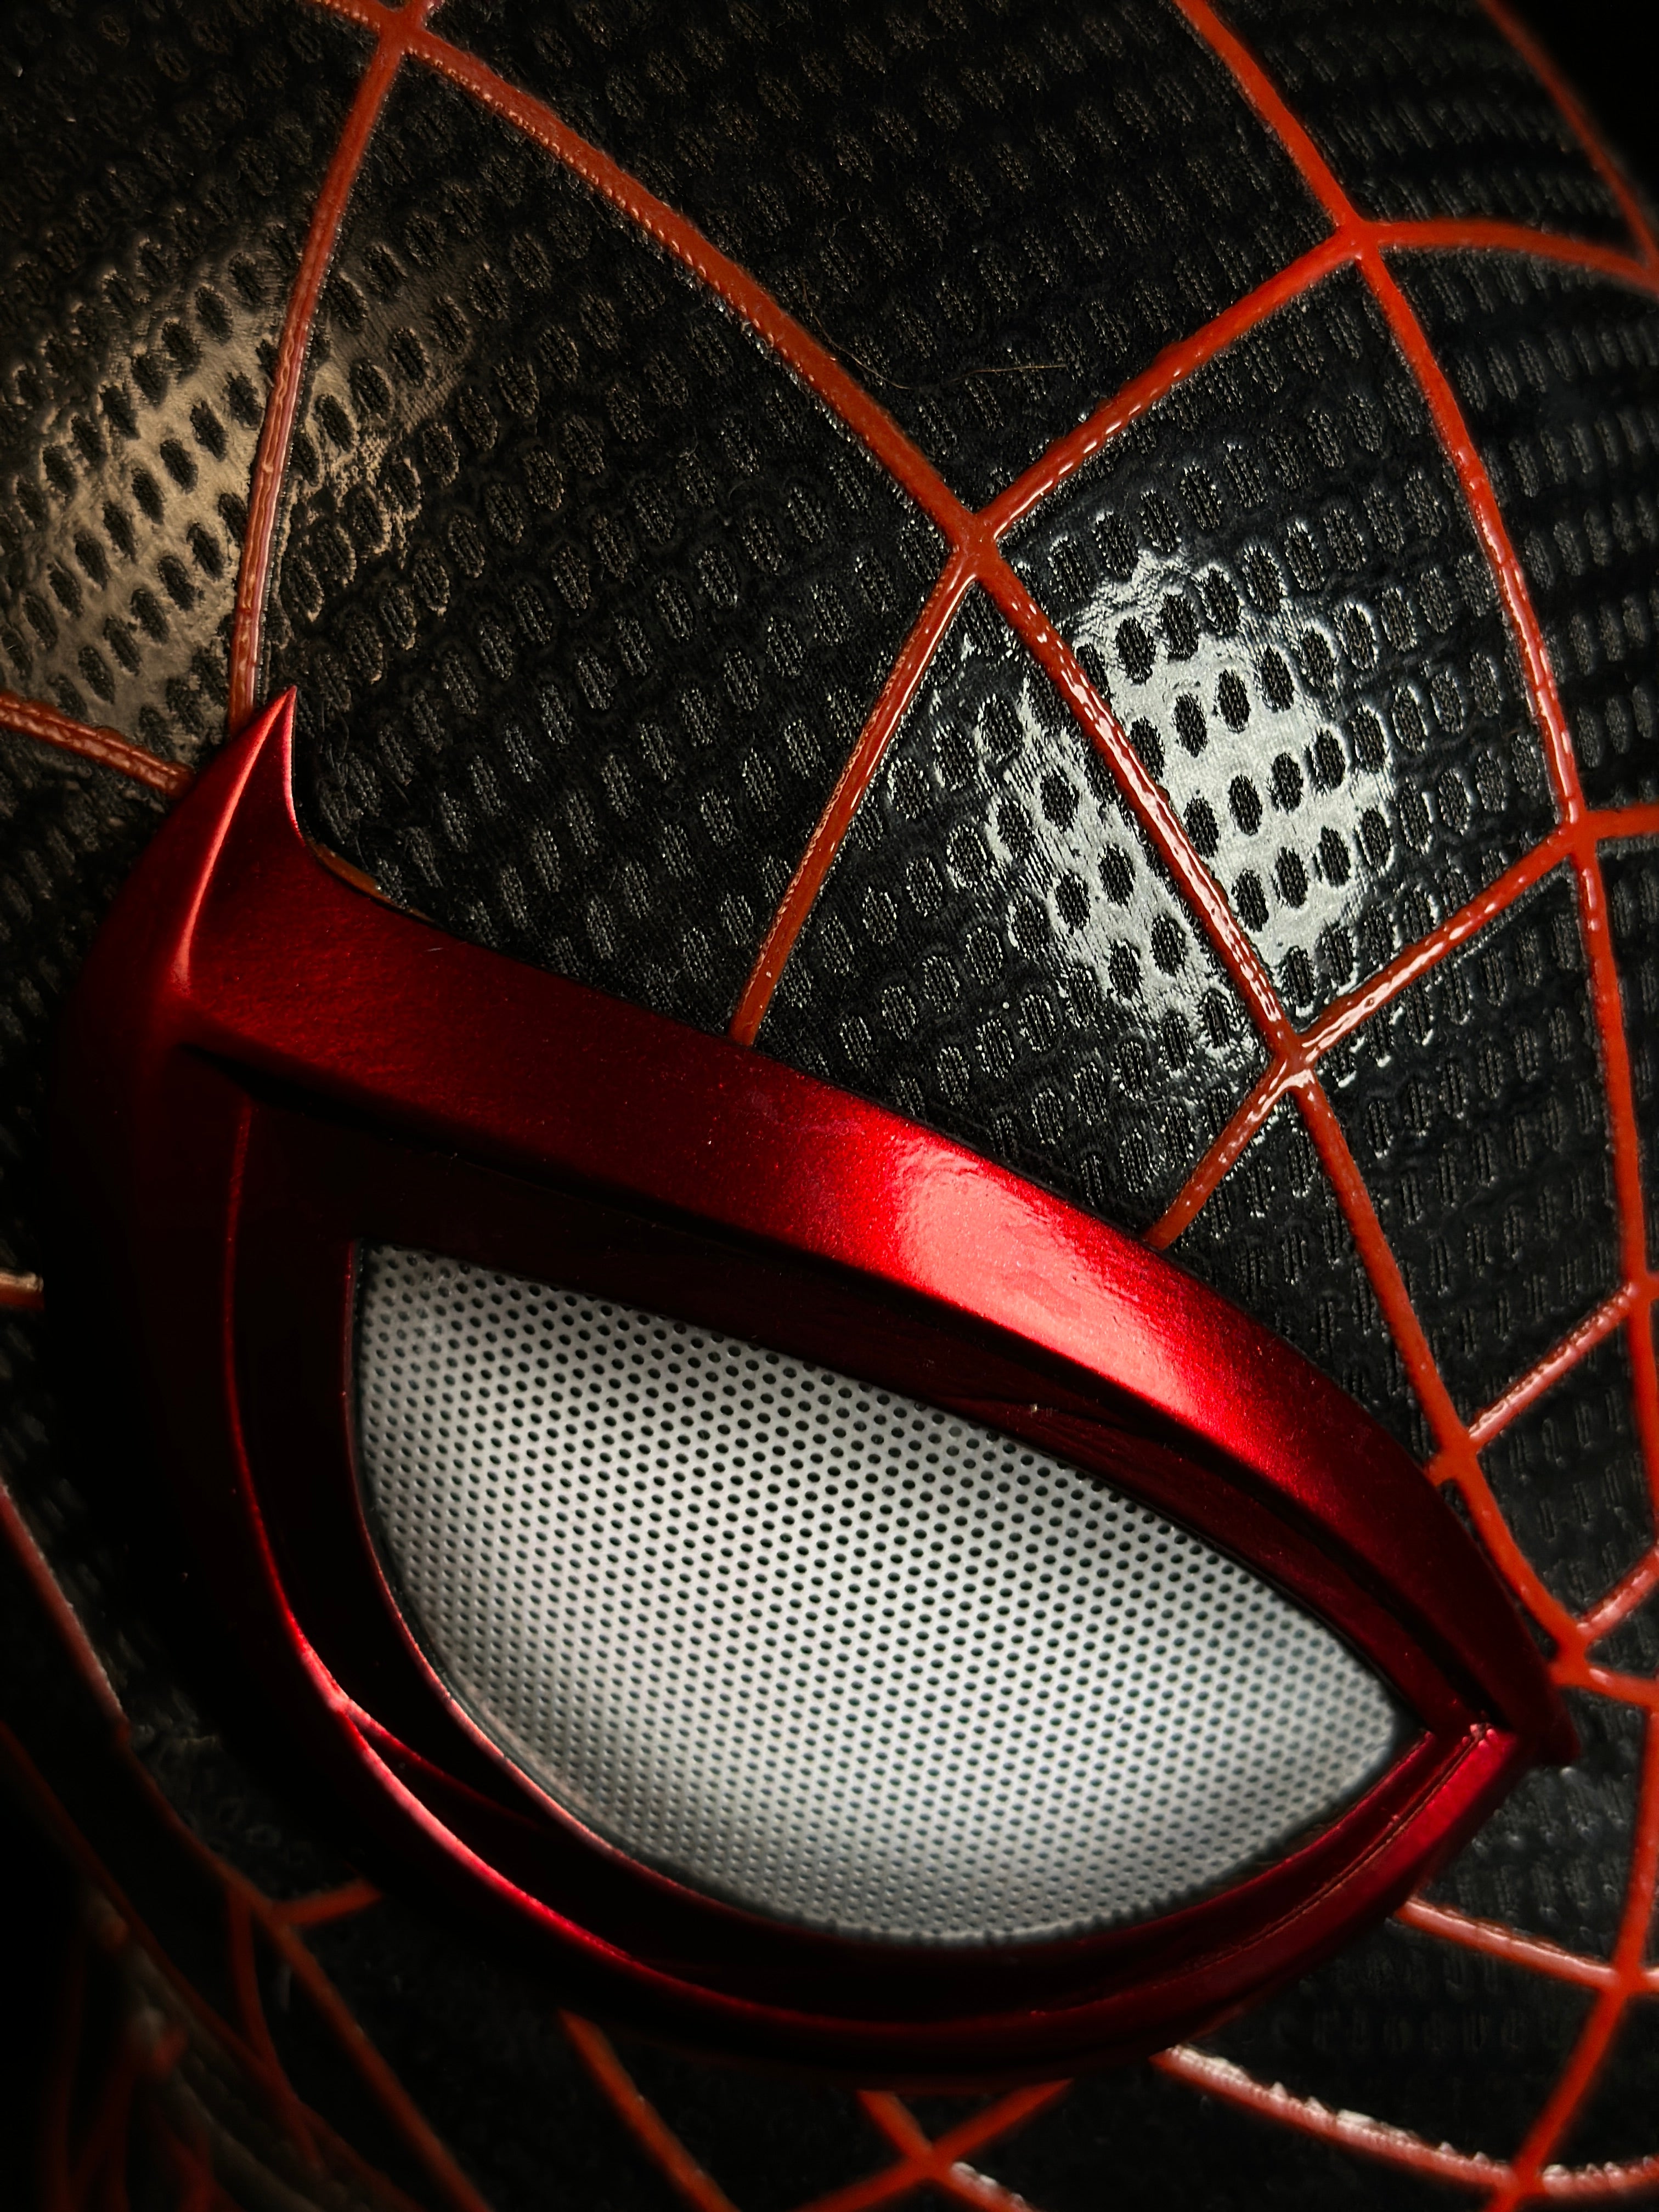 PS5 Spidey Mask with Faceshell and Lenses Wearable Video Game Prop Replica